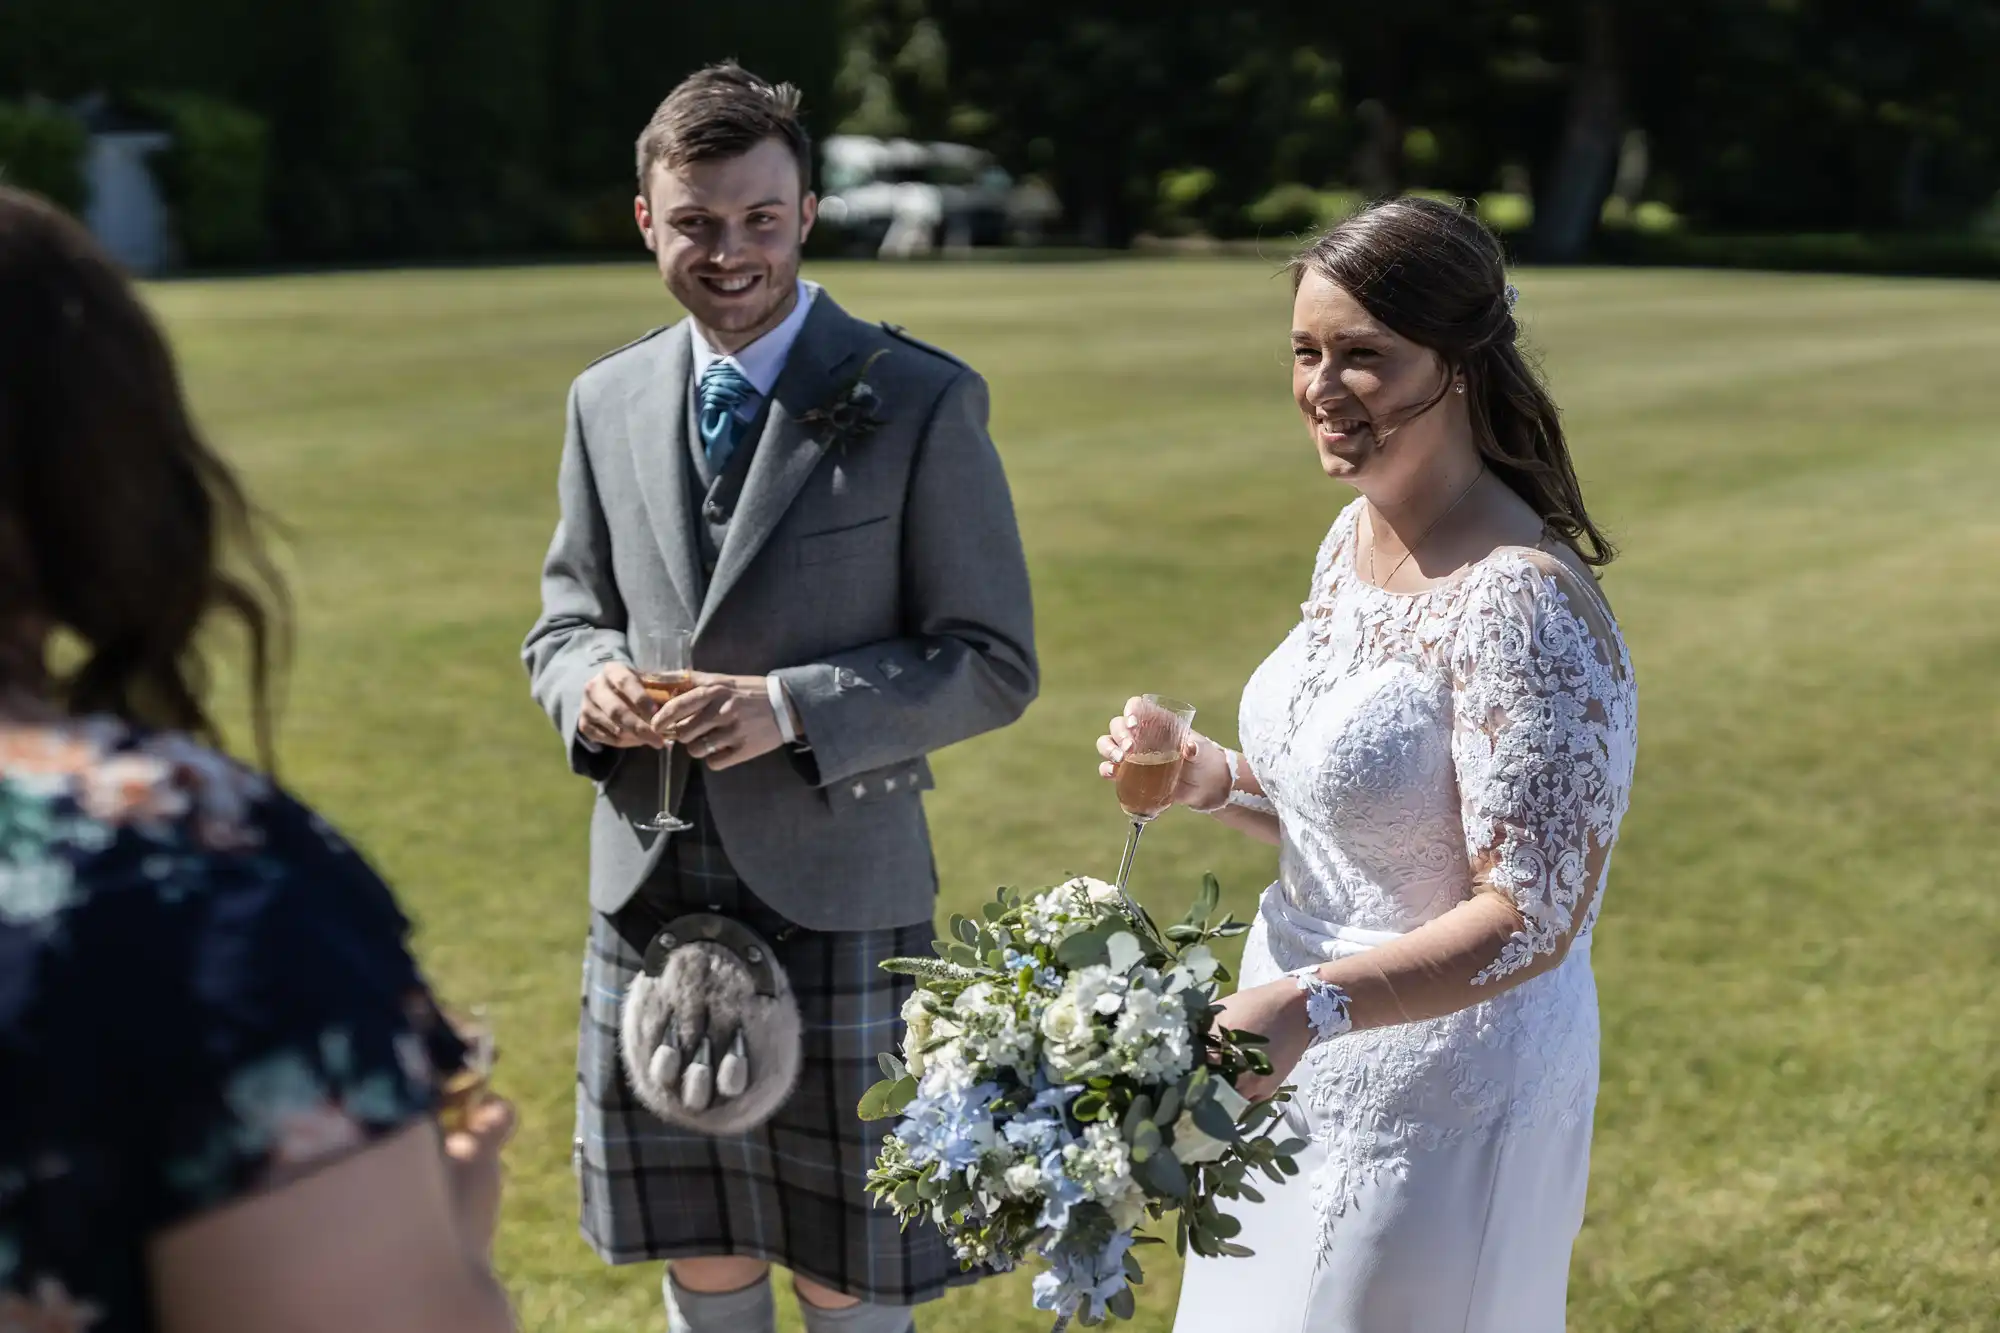 A bride and groom smiling outdoors at their wedding, with the groom in a kilt and the bride holding a bouquet.